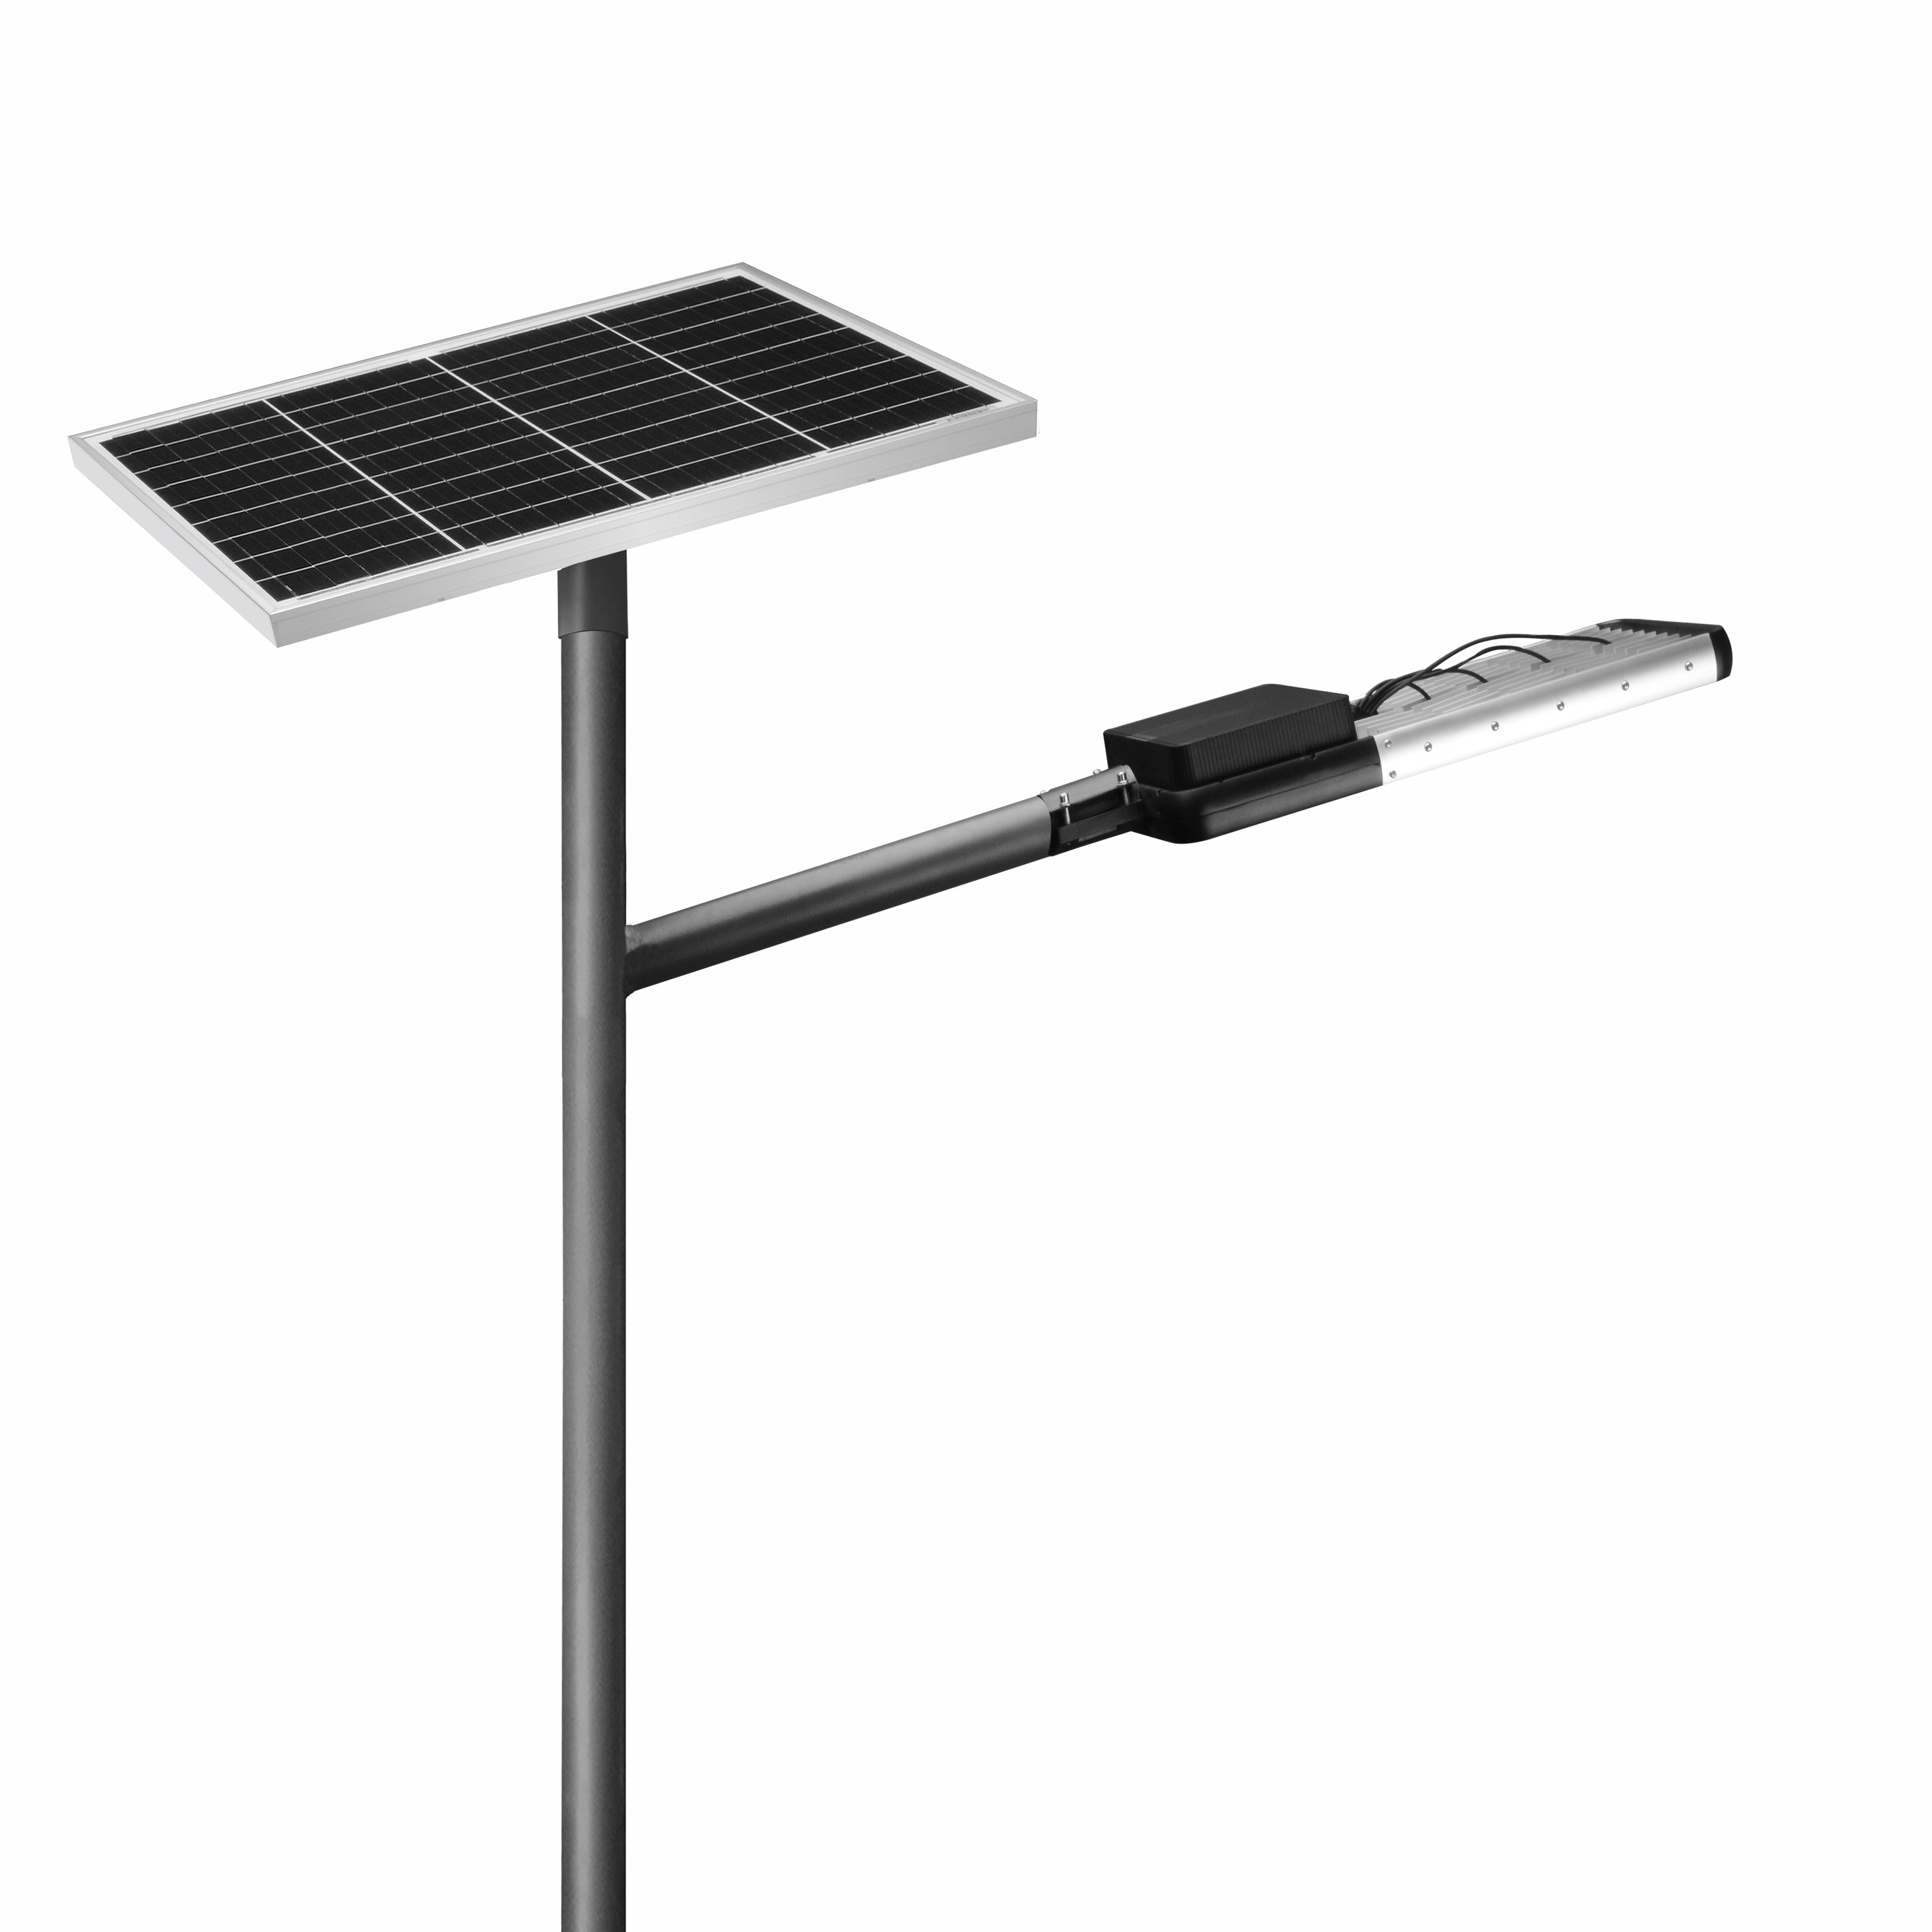 100W New Generation Integrated All in One Solar Street LED Street Light with IEC/TUV/RoHS/CE Certificate with Remote Control